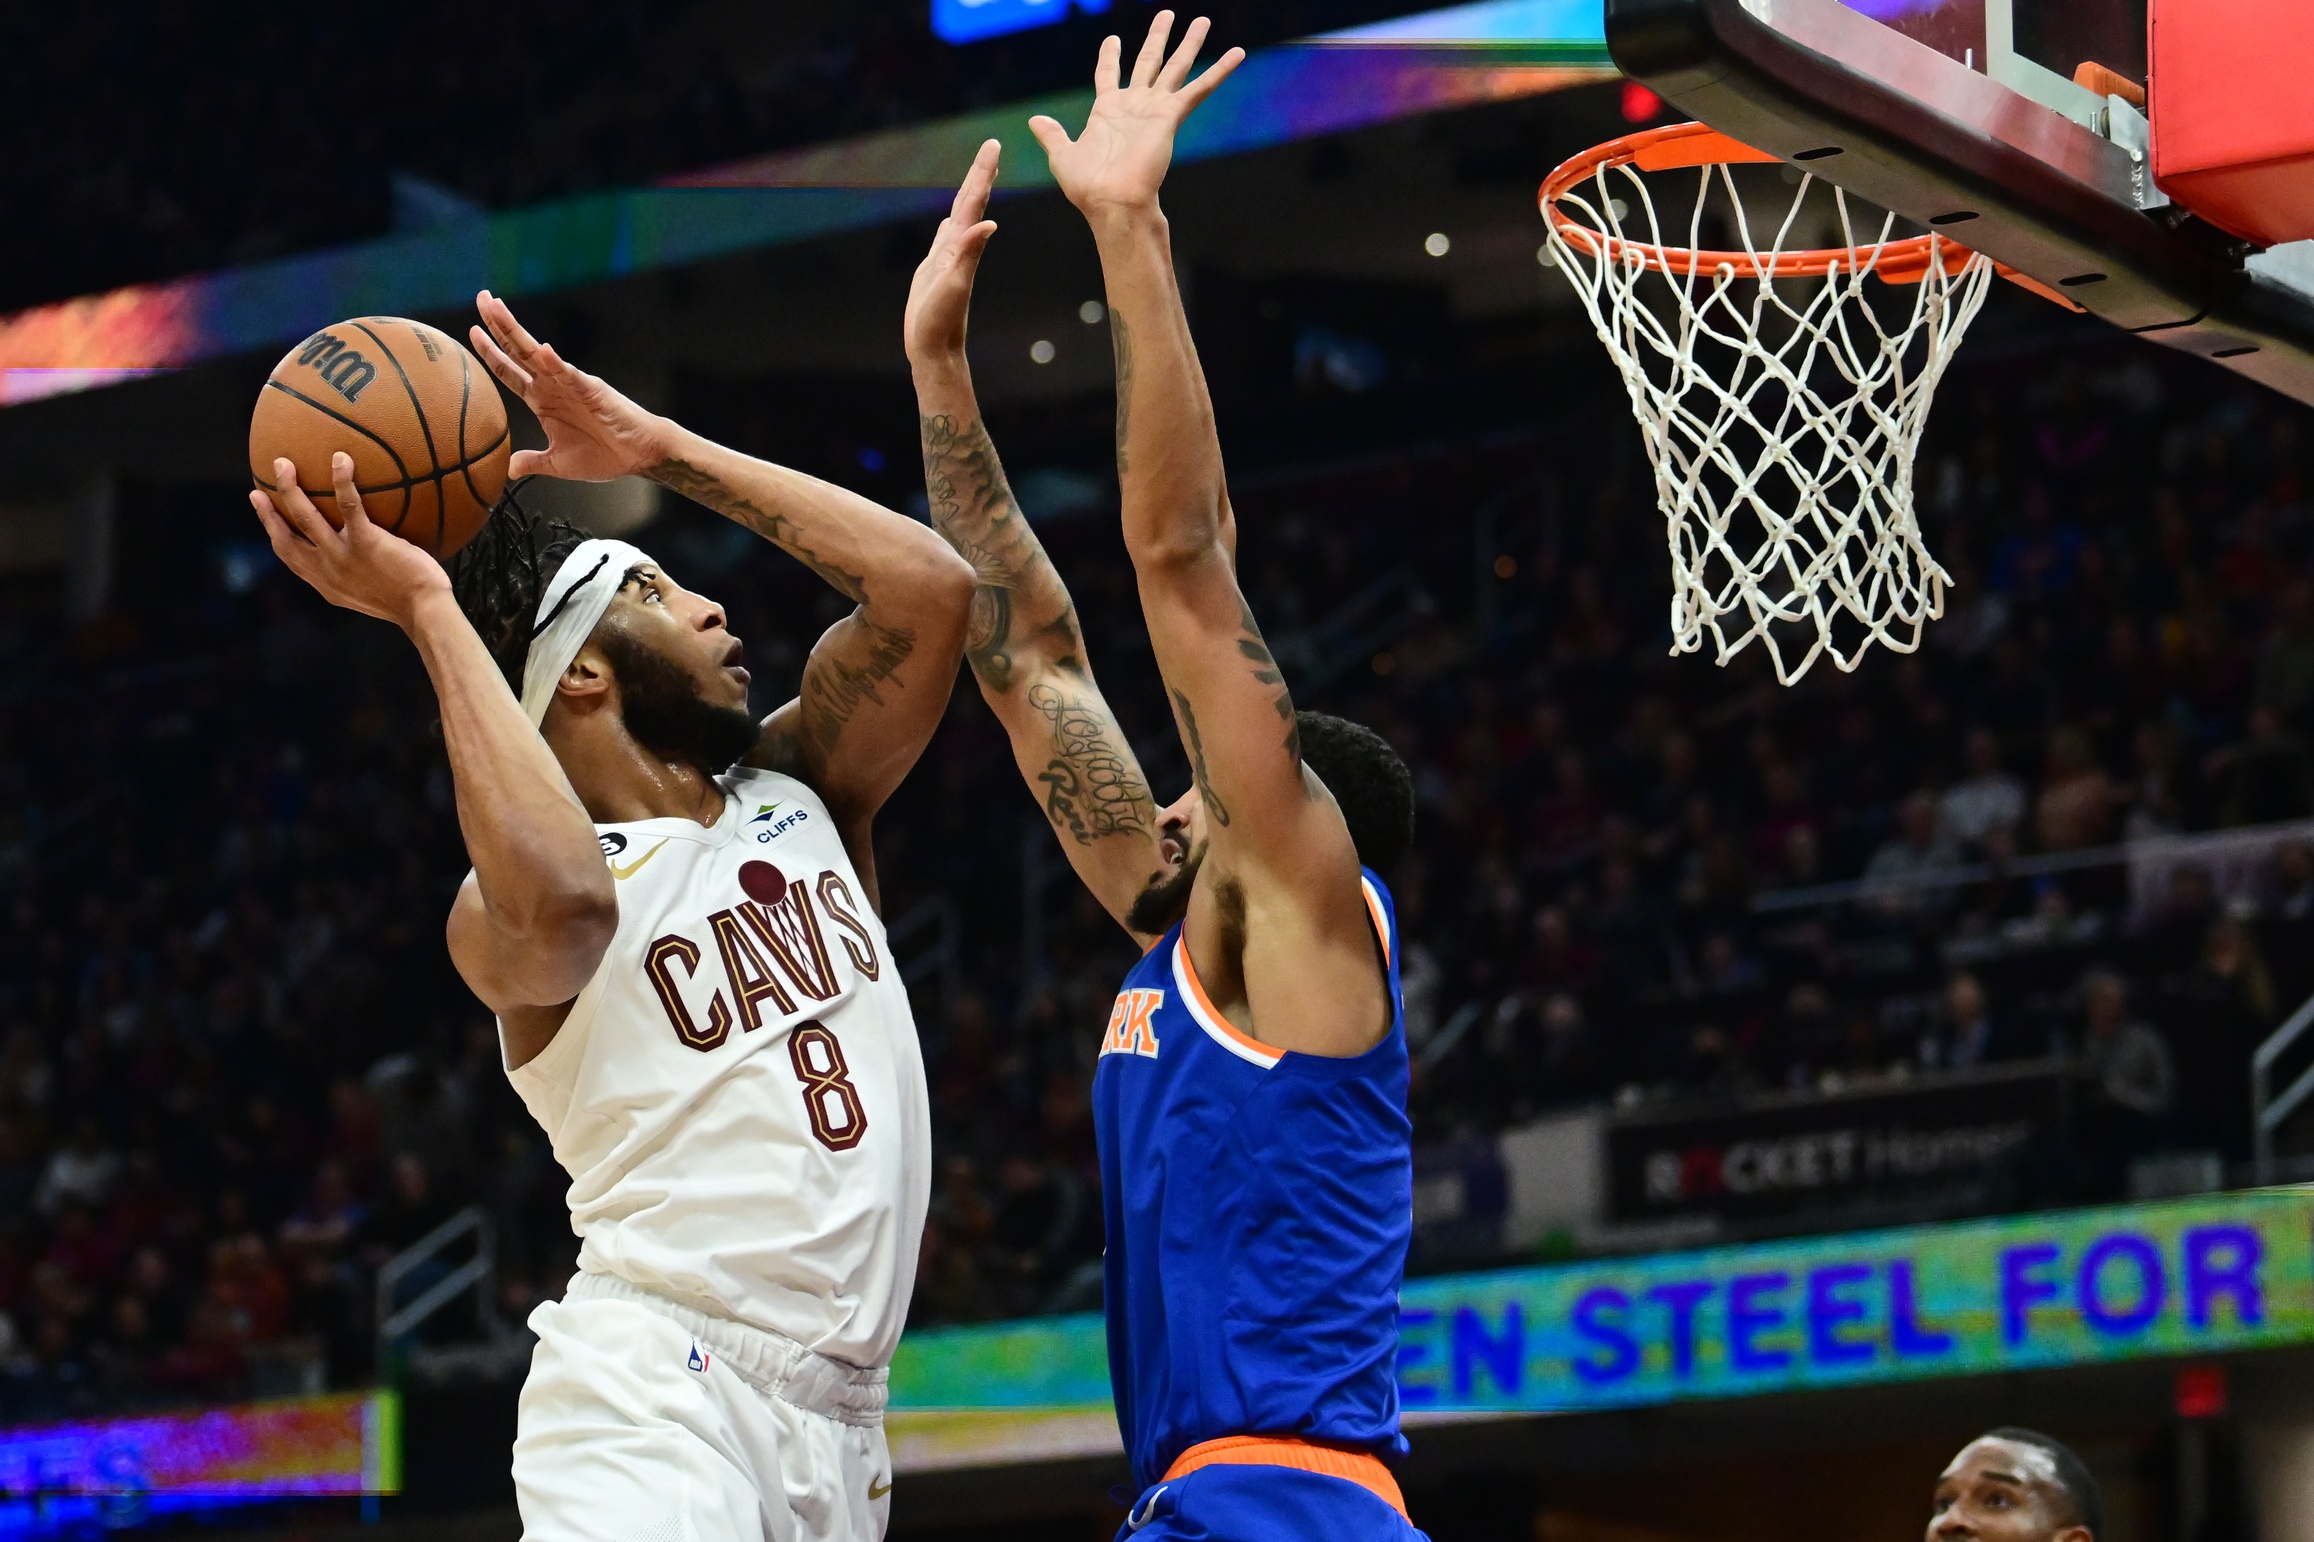 Mar 31, 2023; Cleveland, Ohio, USA; Cleveland Cavaliers forward Lamar Stevens (8) drives to the basket against New York Knicks forward Obi Toppin (1) during the second half at Rocket Mortgage FieldHouse. Mandatory Credit: Ken Blaze-USA TODAY Sports